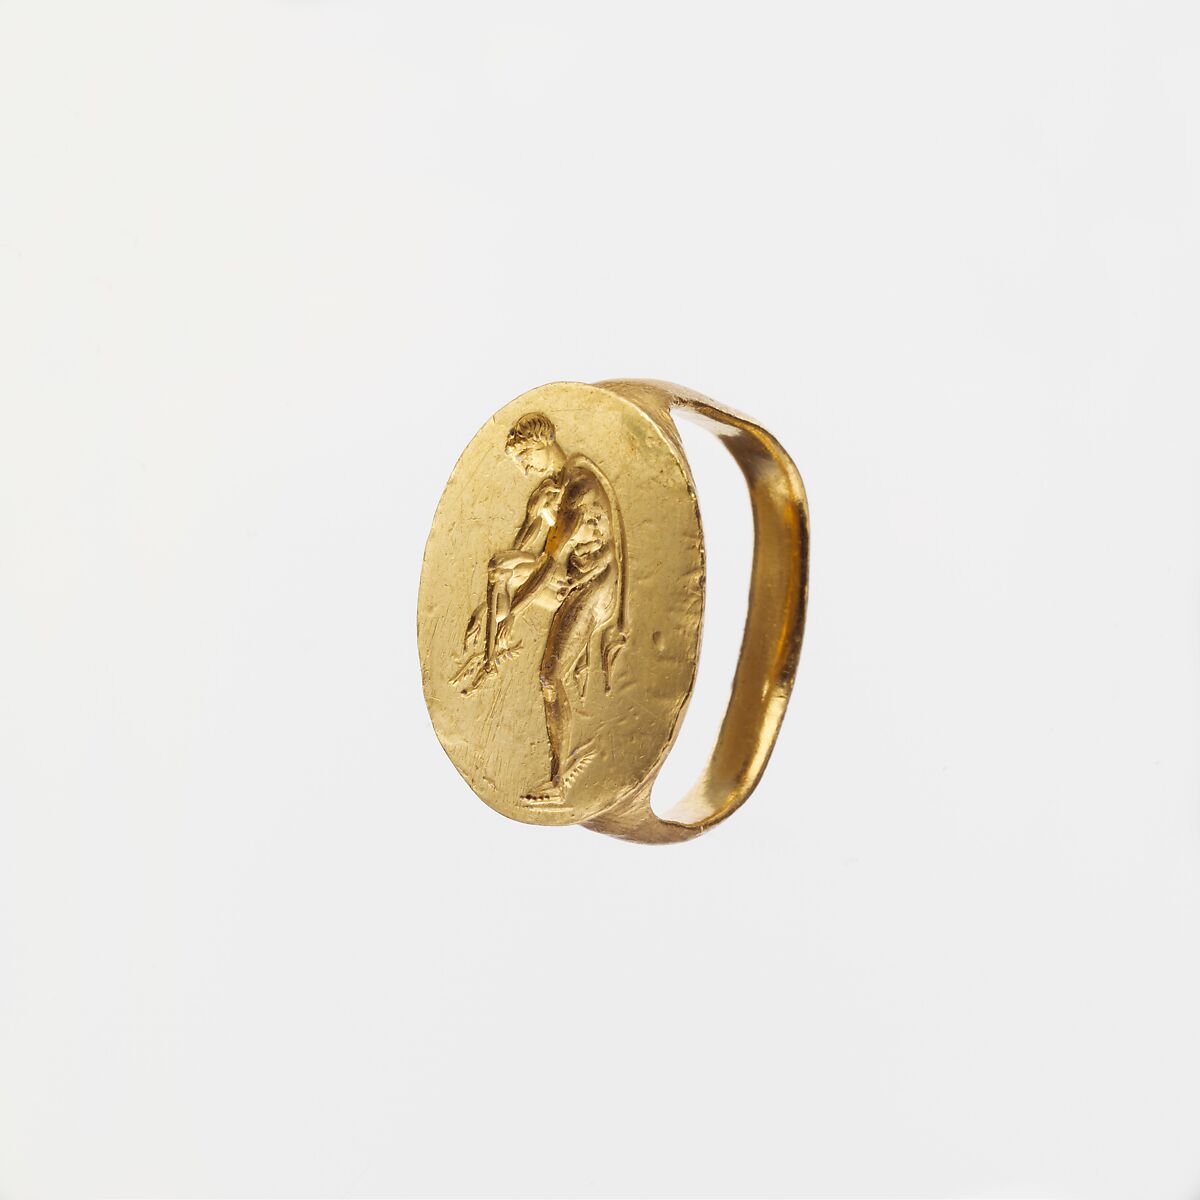 Gold finger ring engraved with an image of Hermes, Gold, Greek, South Italian, Tarentine 